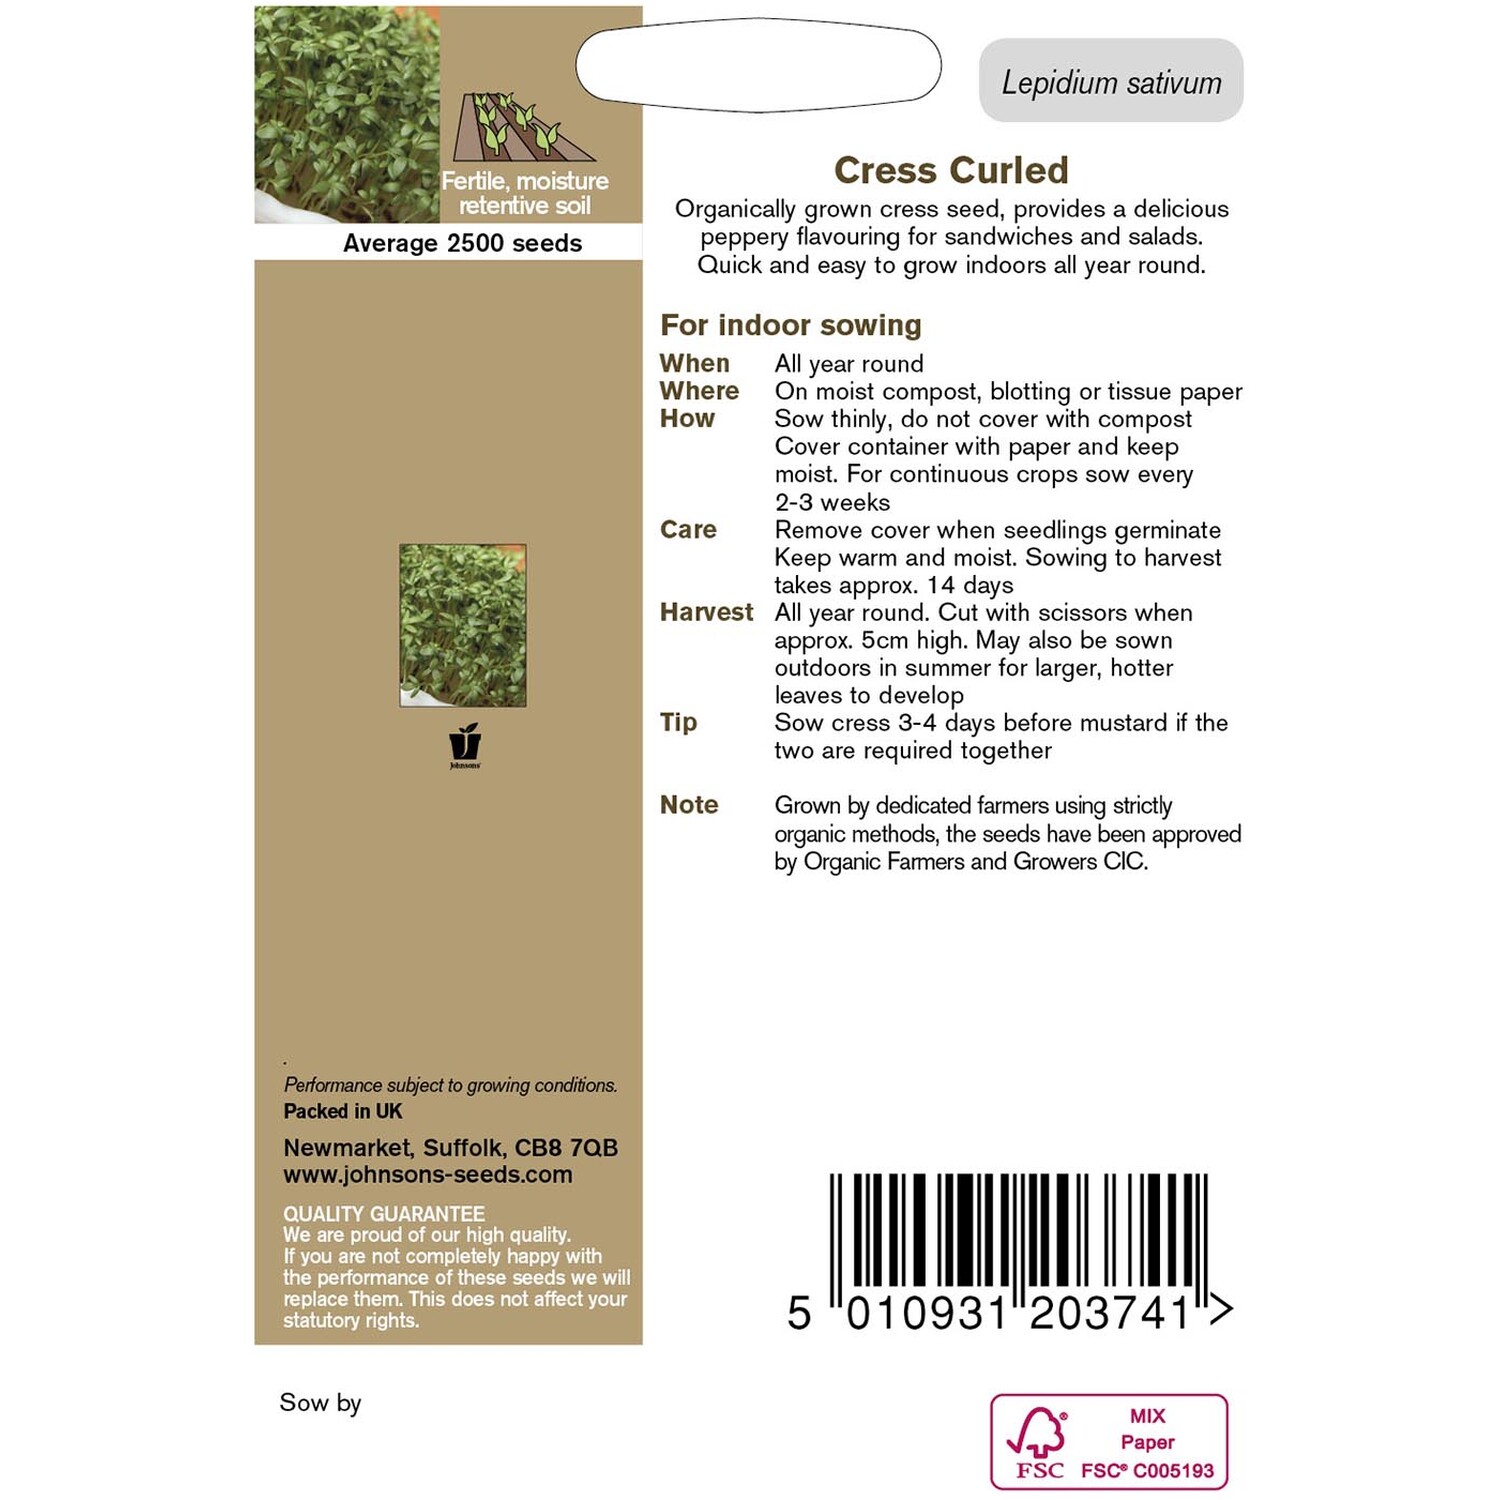 Johnsons Curled Cress Vegetable Seeds Image 3